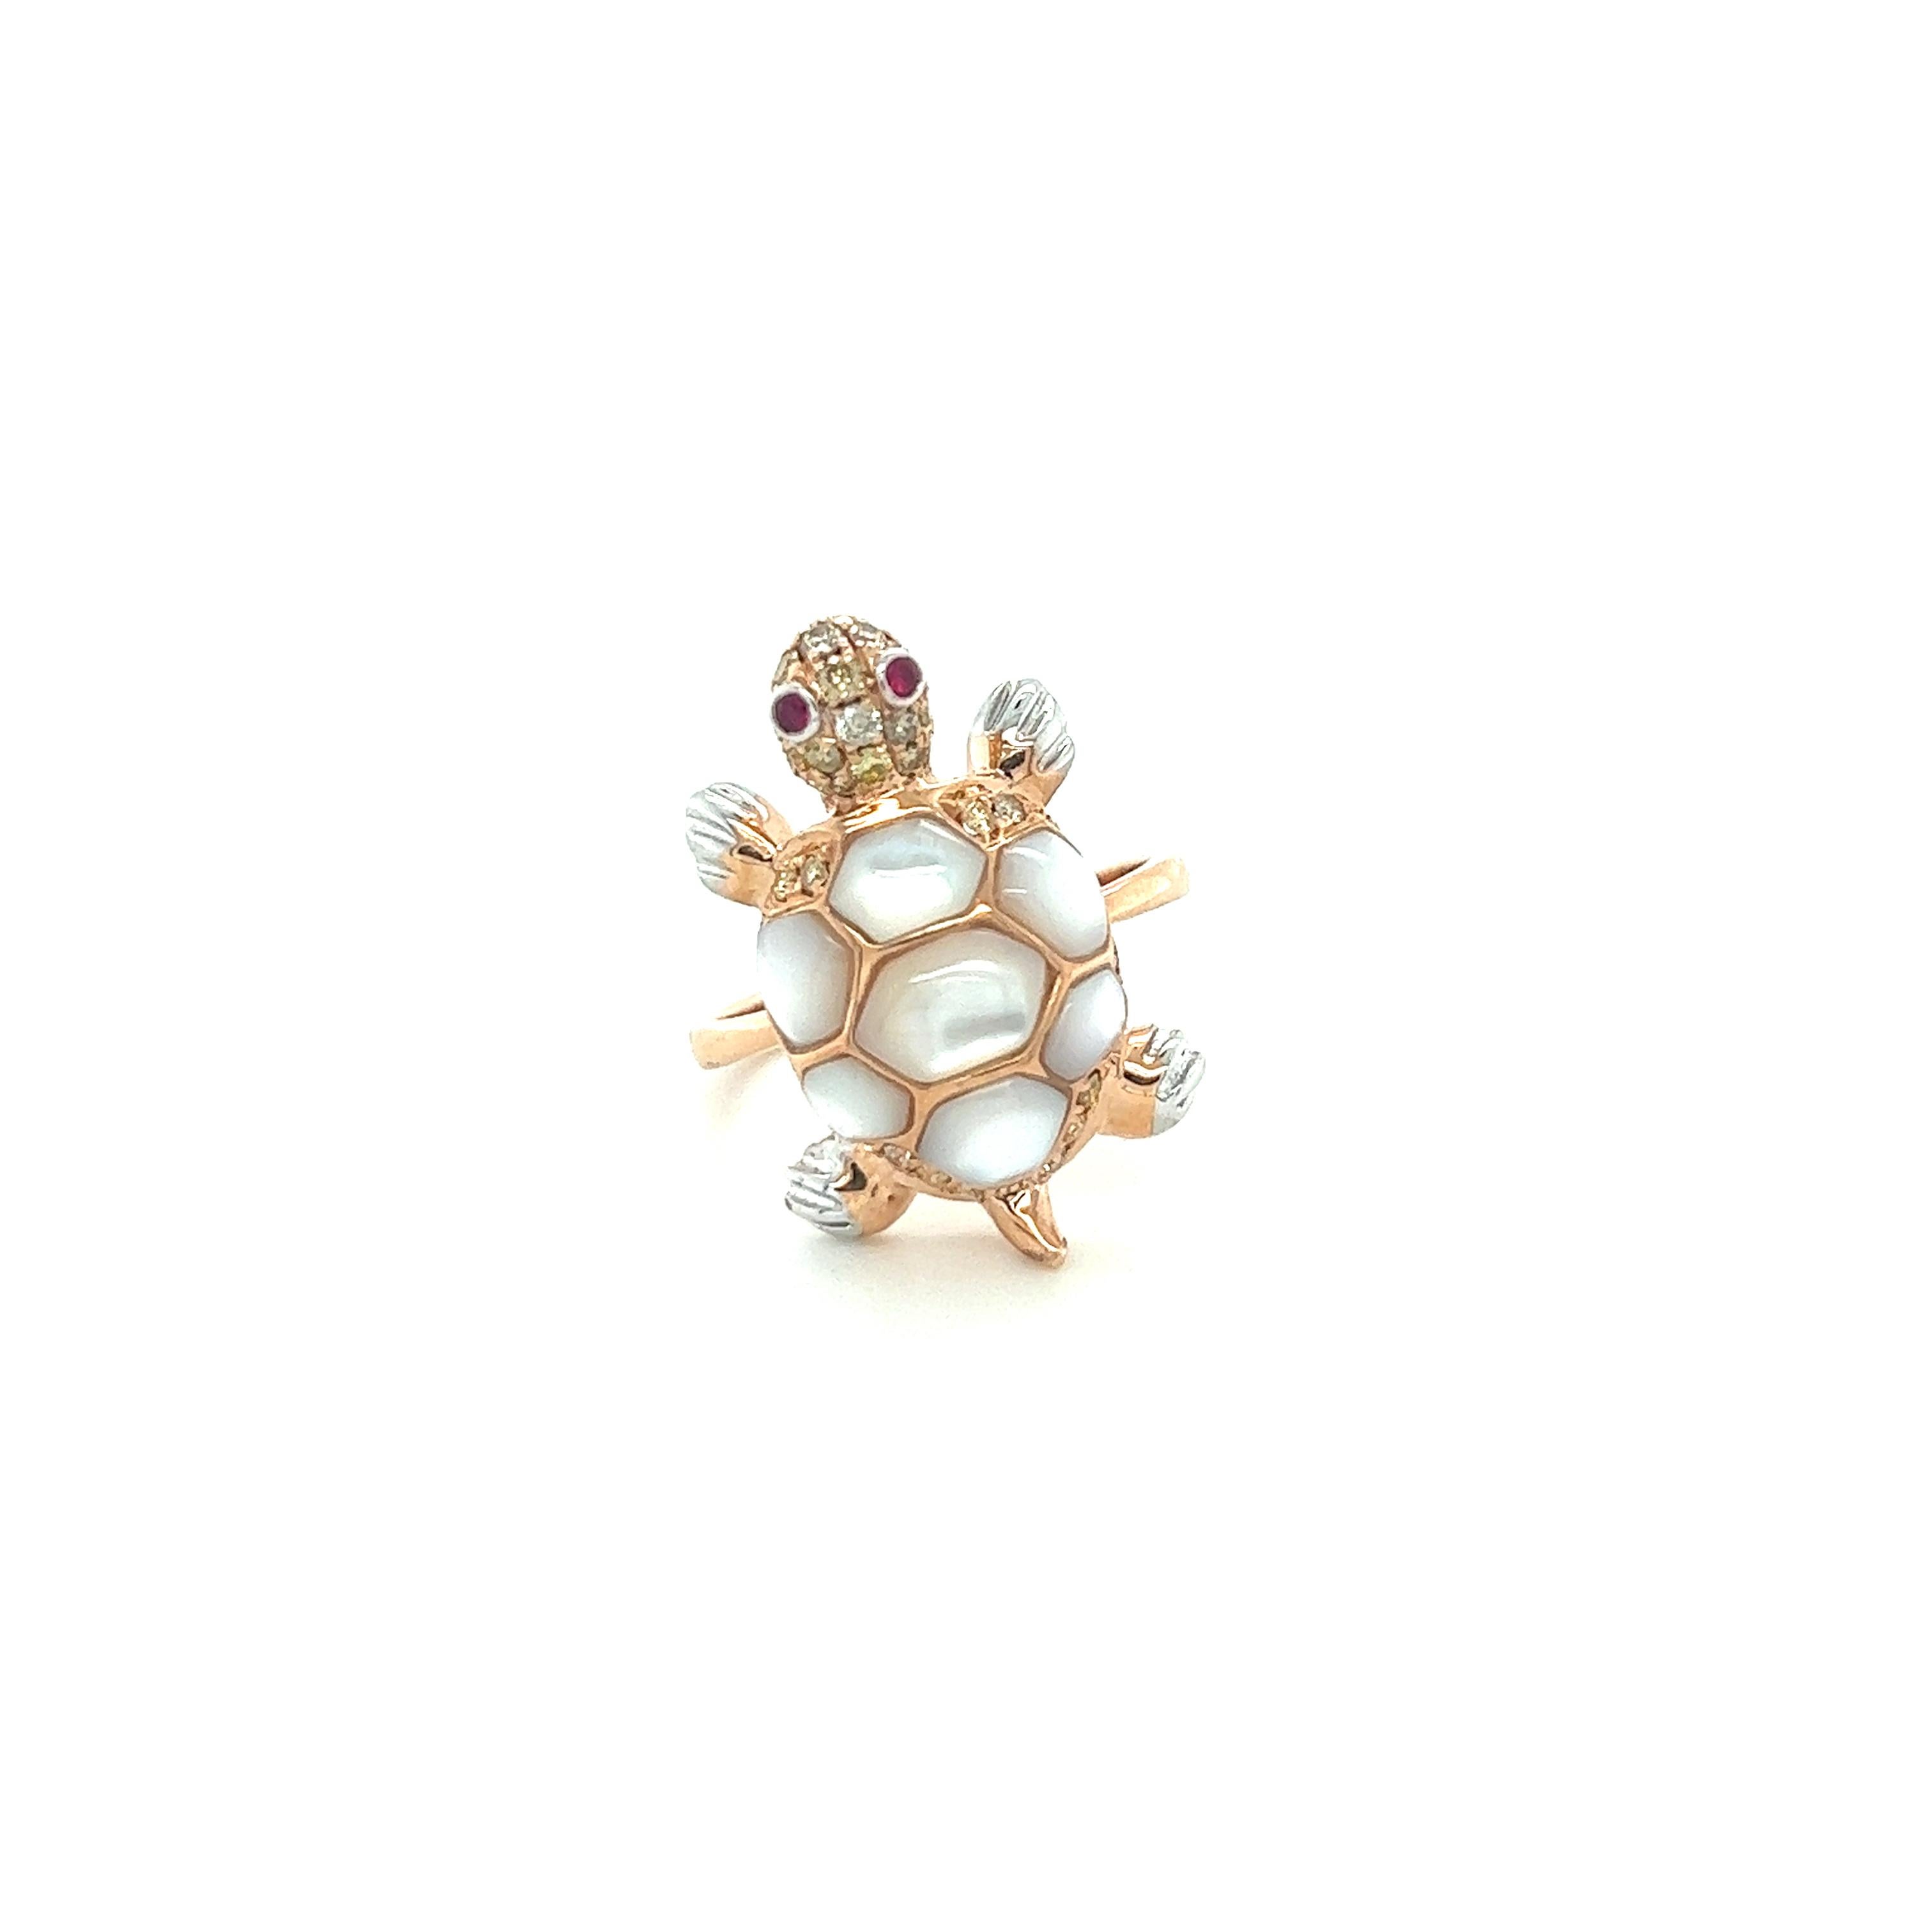 Tortoise White Shell 18K Rose Gold Ring

28 Diamonds 0.30CT
2 Rubies 0.03CT
7 White Pearls 2.45CT
18 K Rose Gold 5.42GM

The pearl meaning is centered around purity, balance, and inner wisdom. Pearls have long been a source of pure fascination.